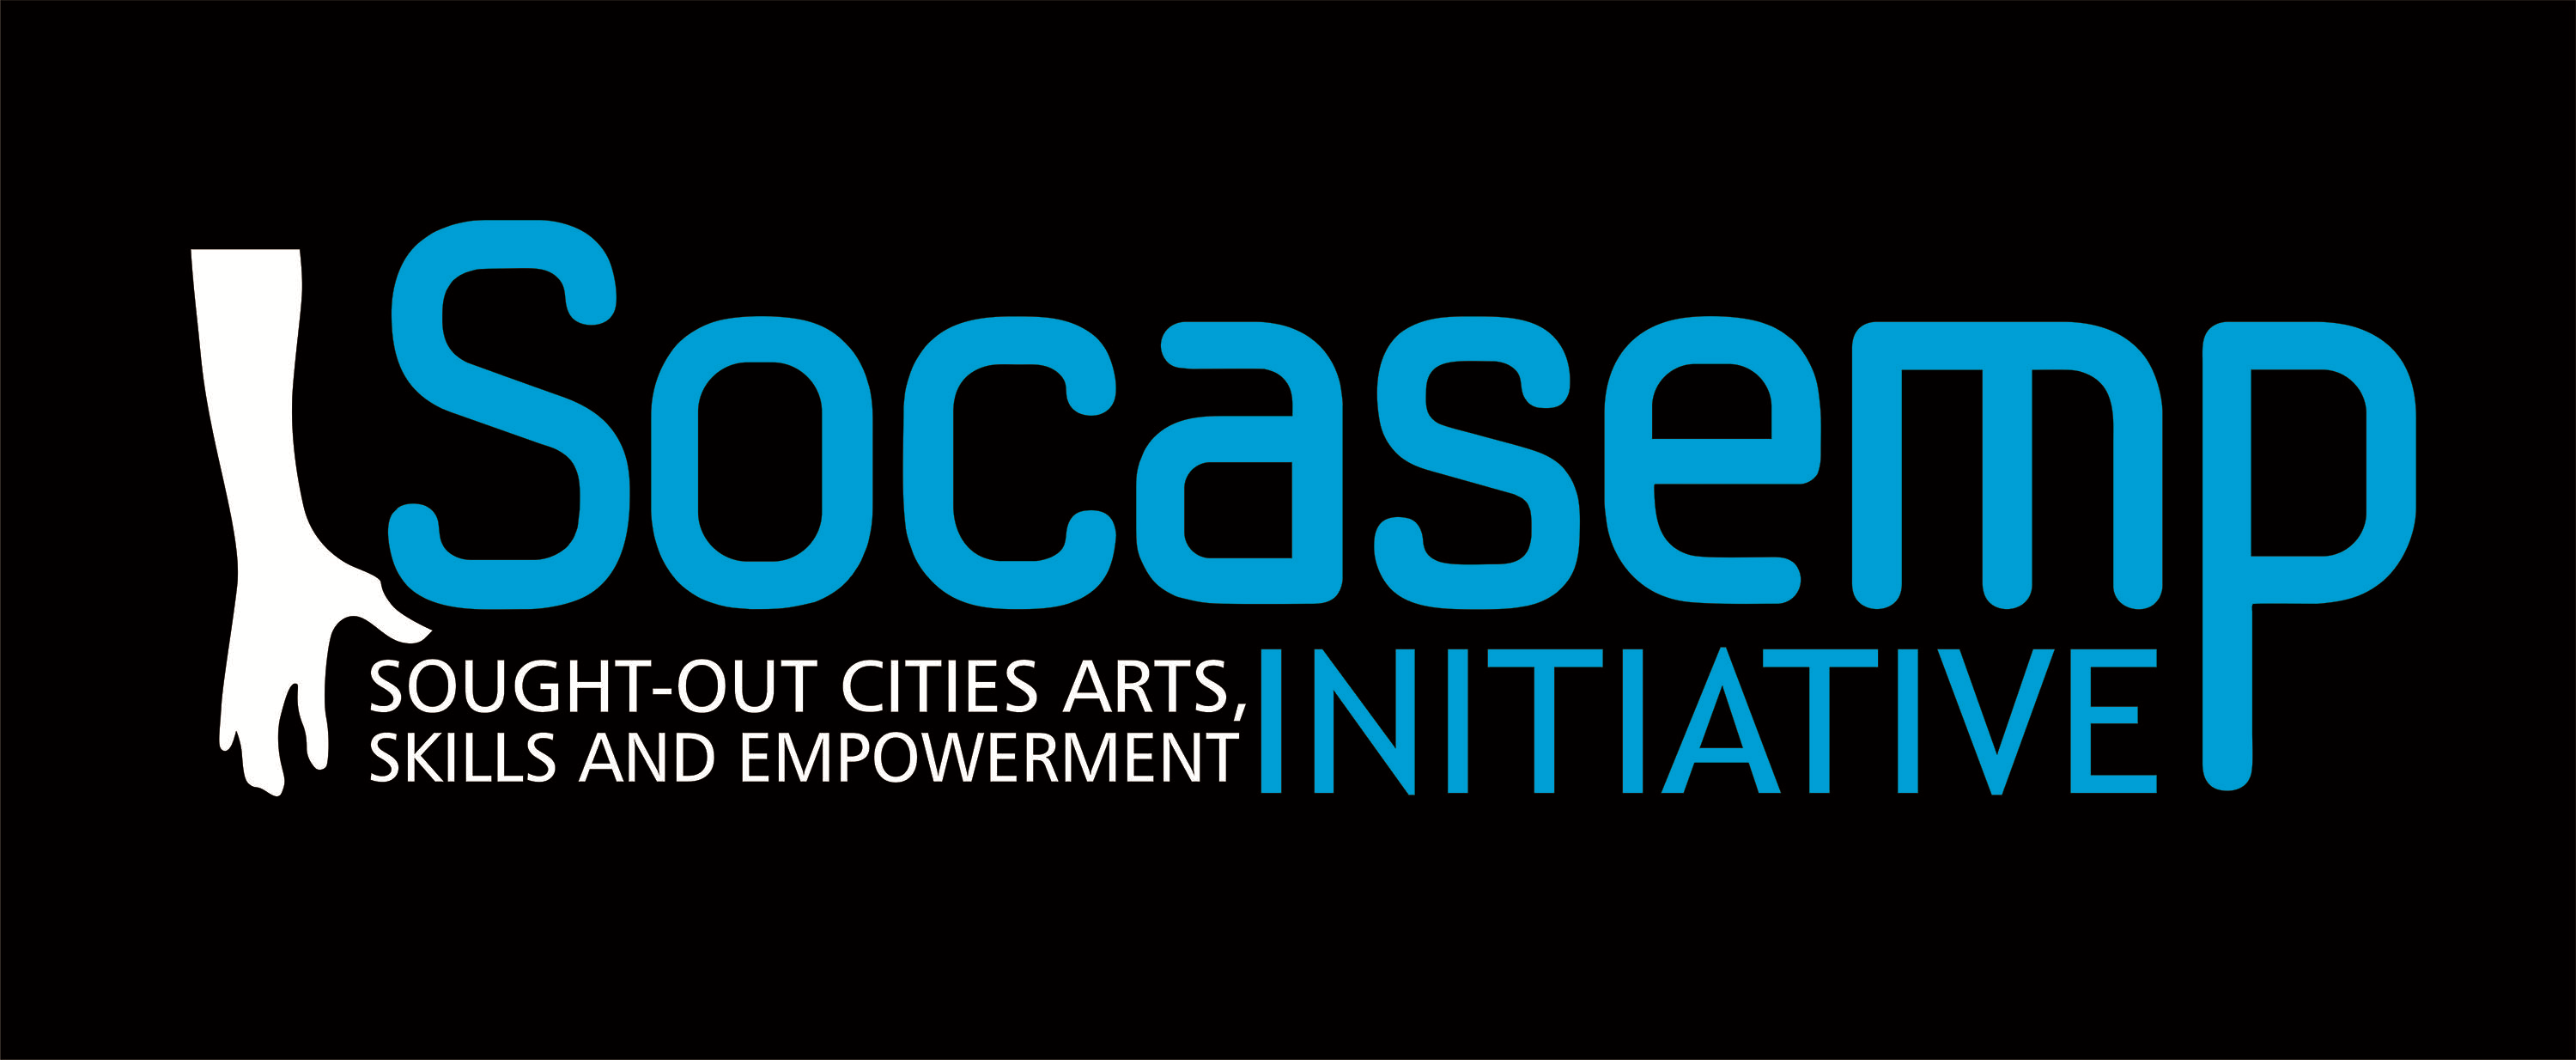 SOUGHT-OUT CITIES ARTS, SKILLS AND EMPOWERMENT INITIATIVE